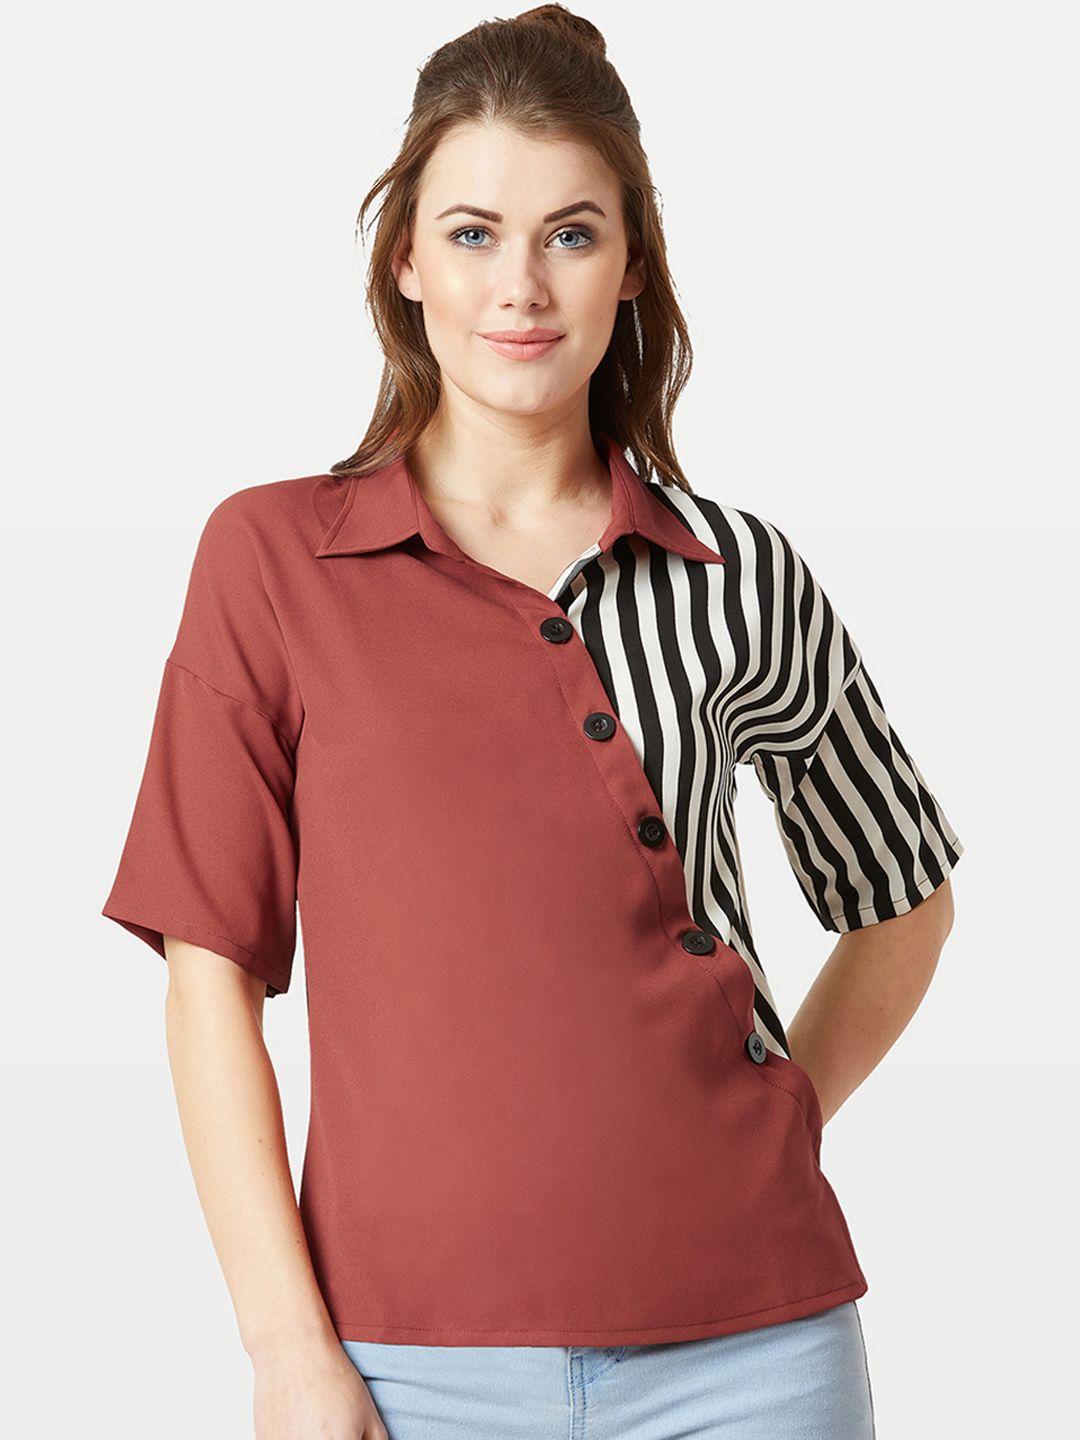 miss chase women maroon striped shirt style top